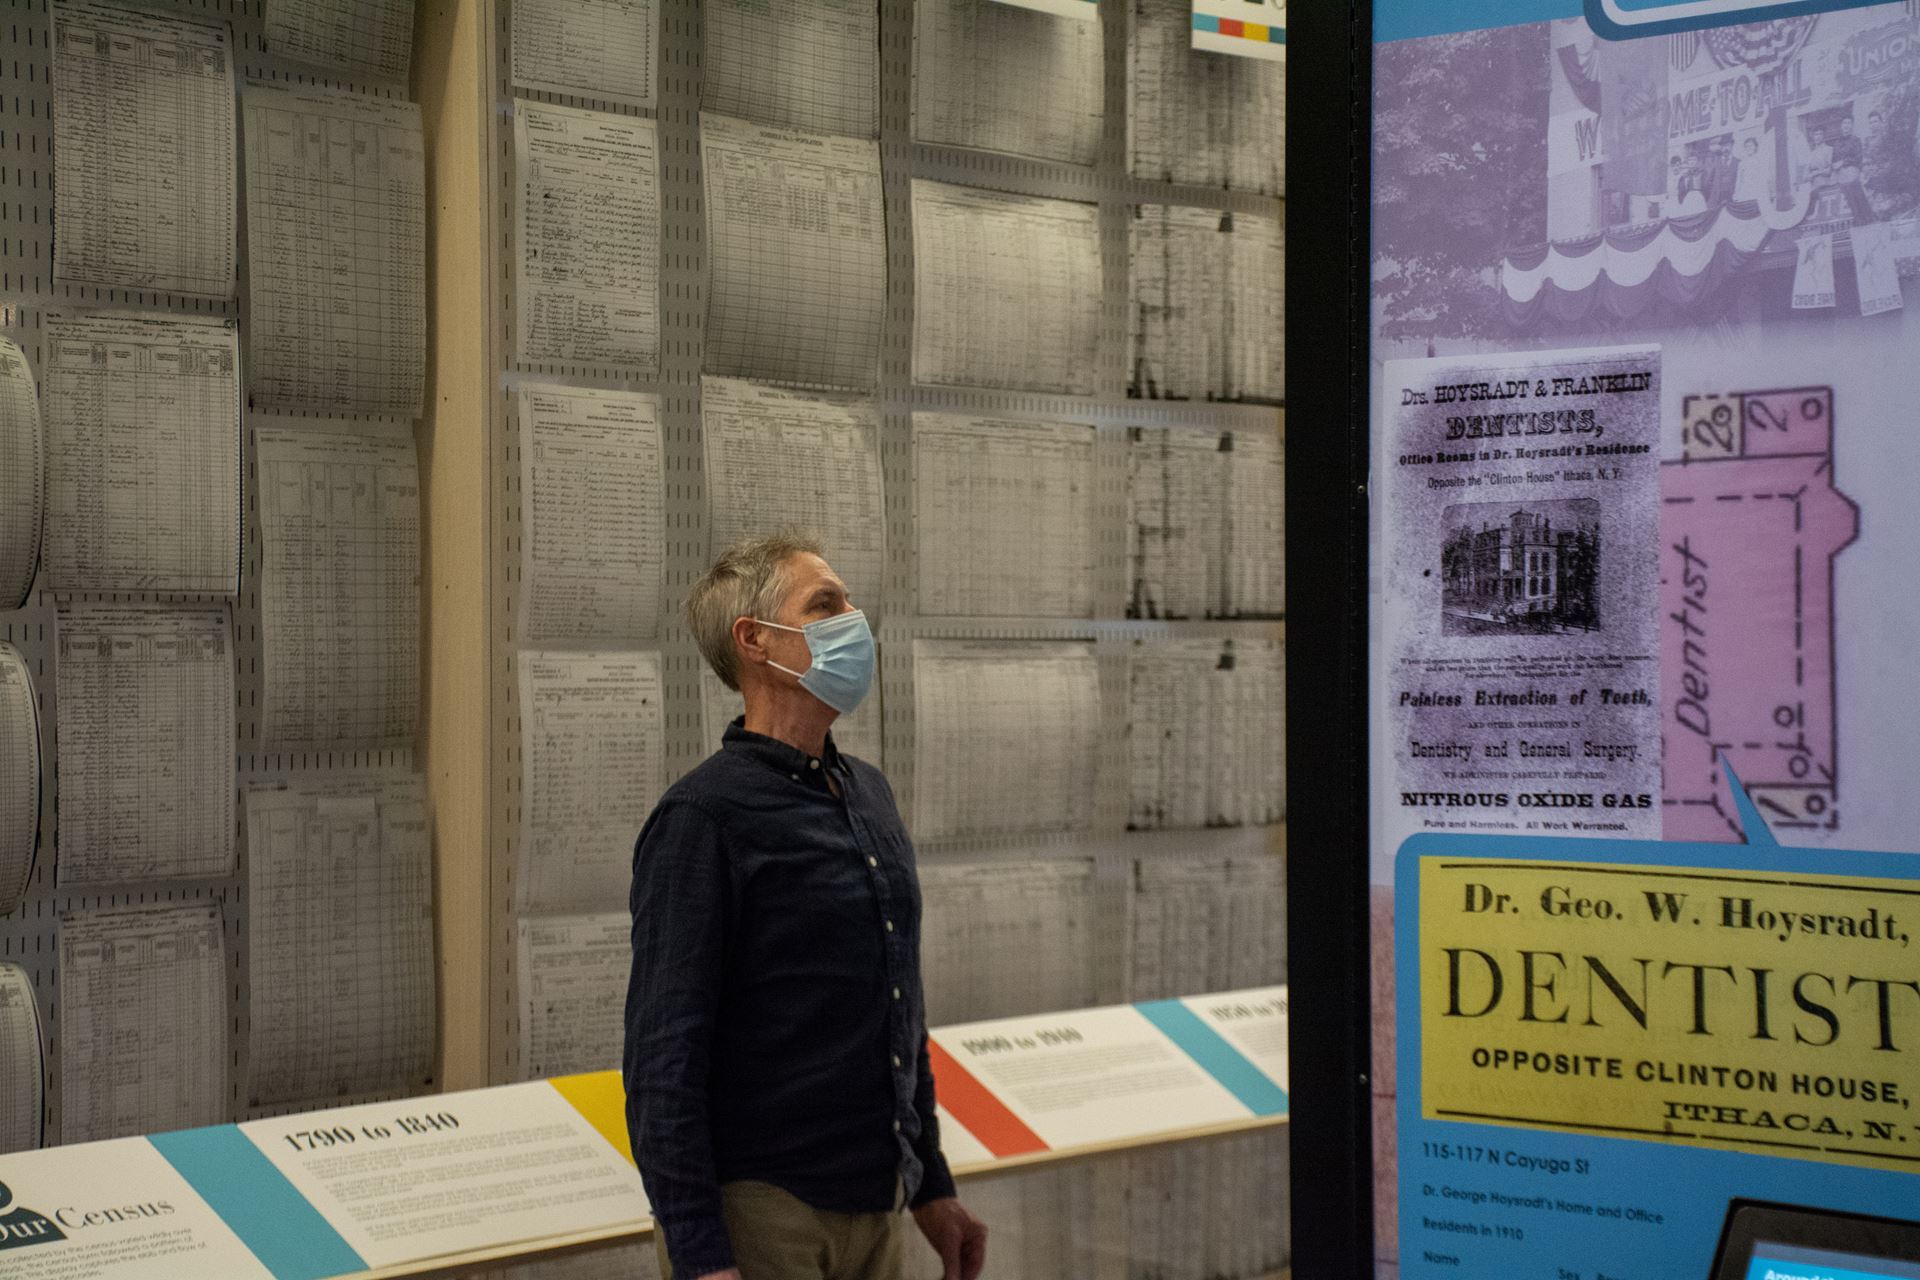 A small rectangular image of a visitor standing in front of the census exhibit.